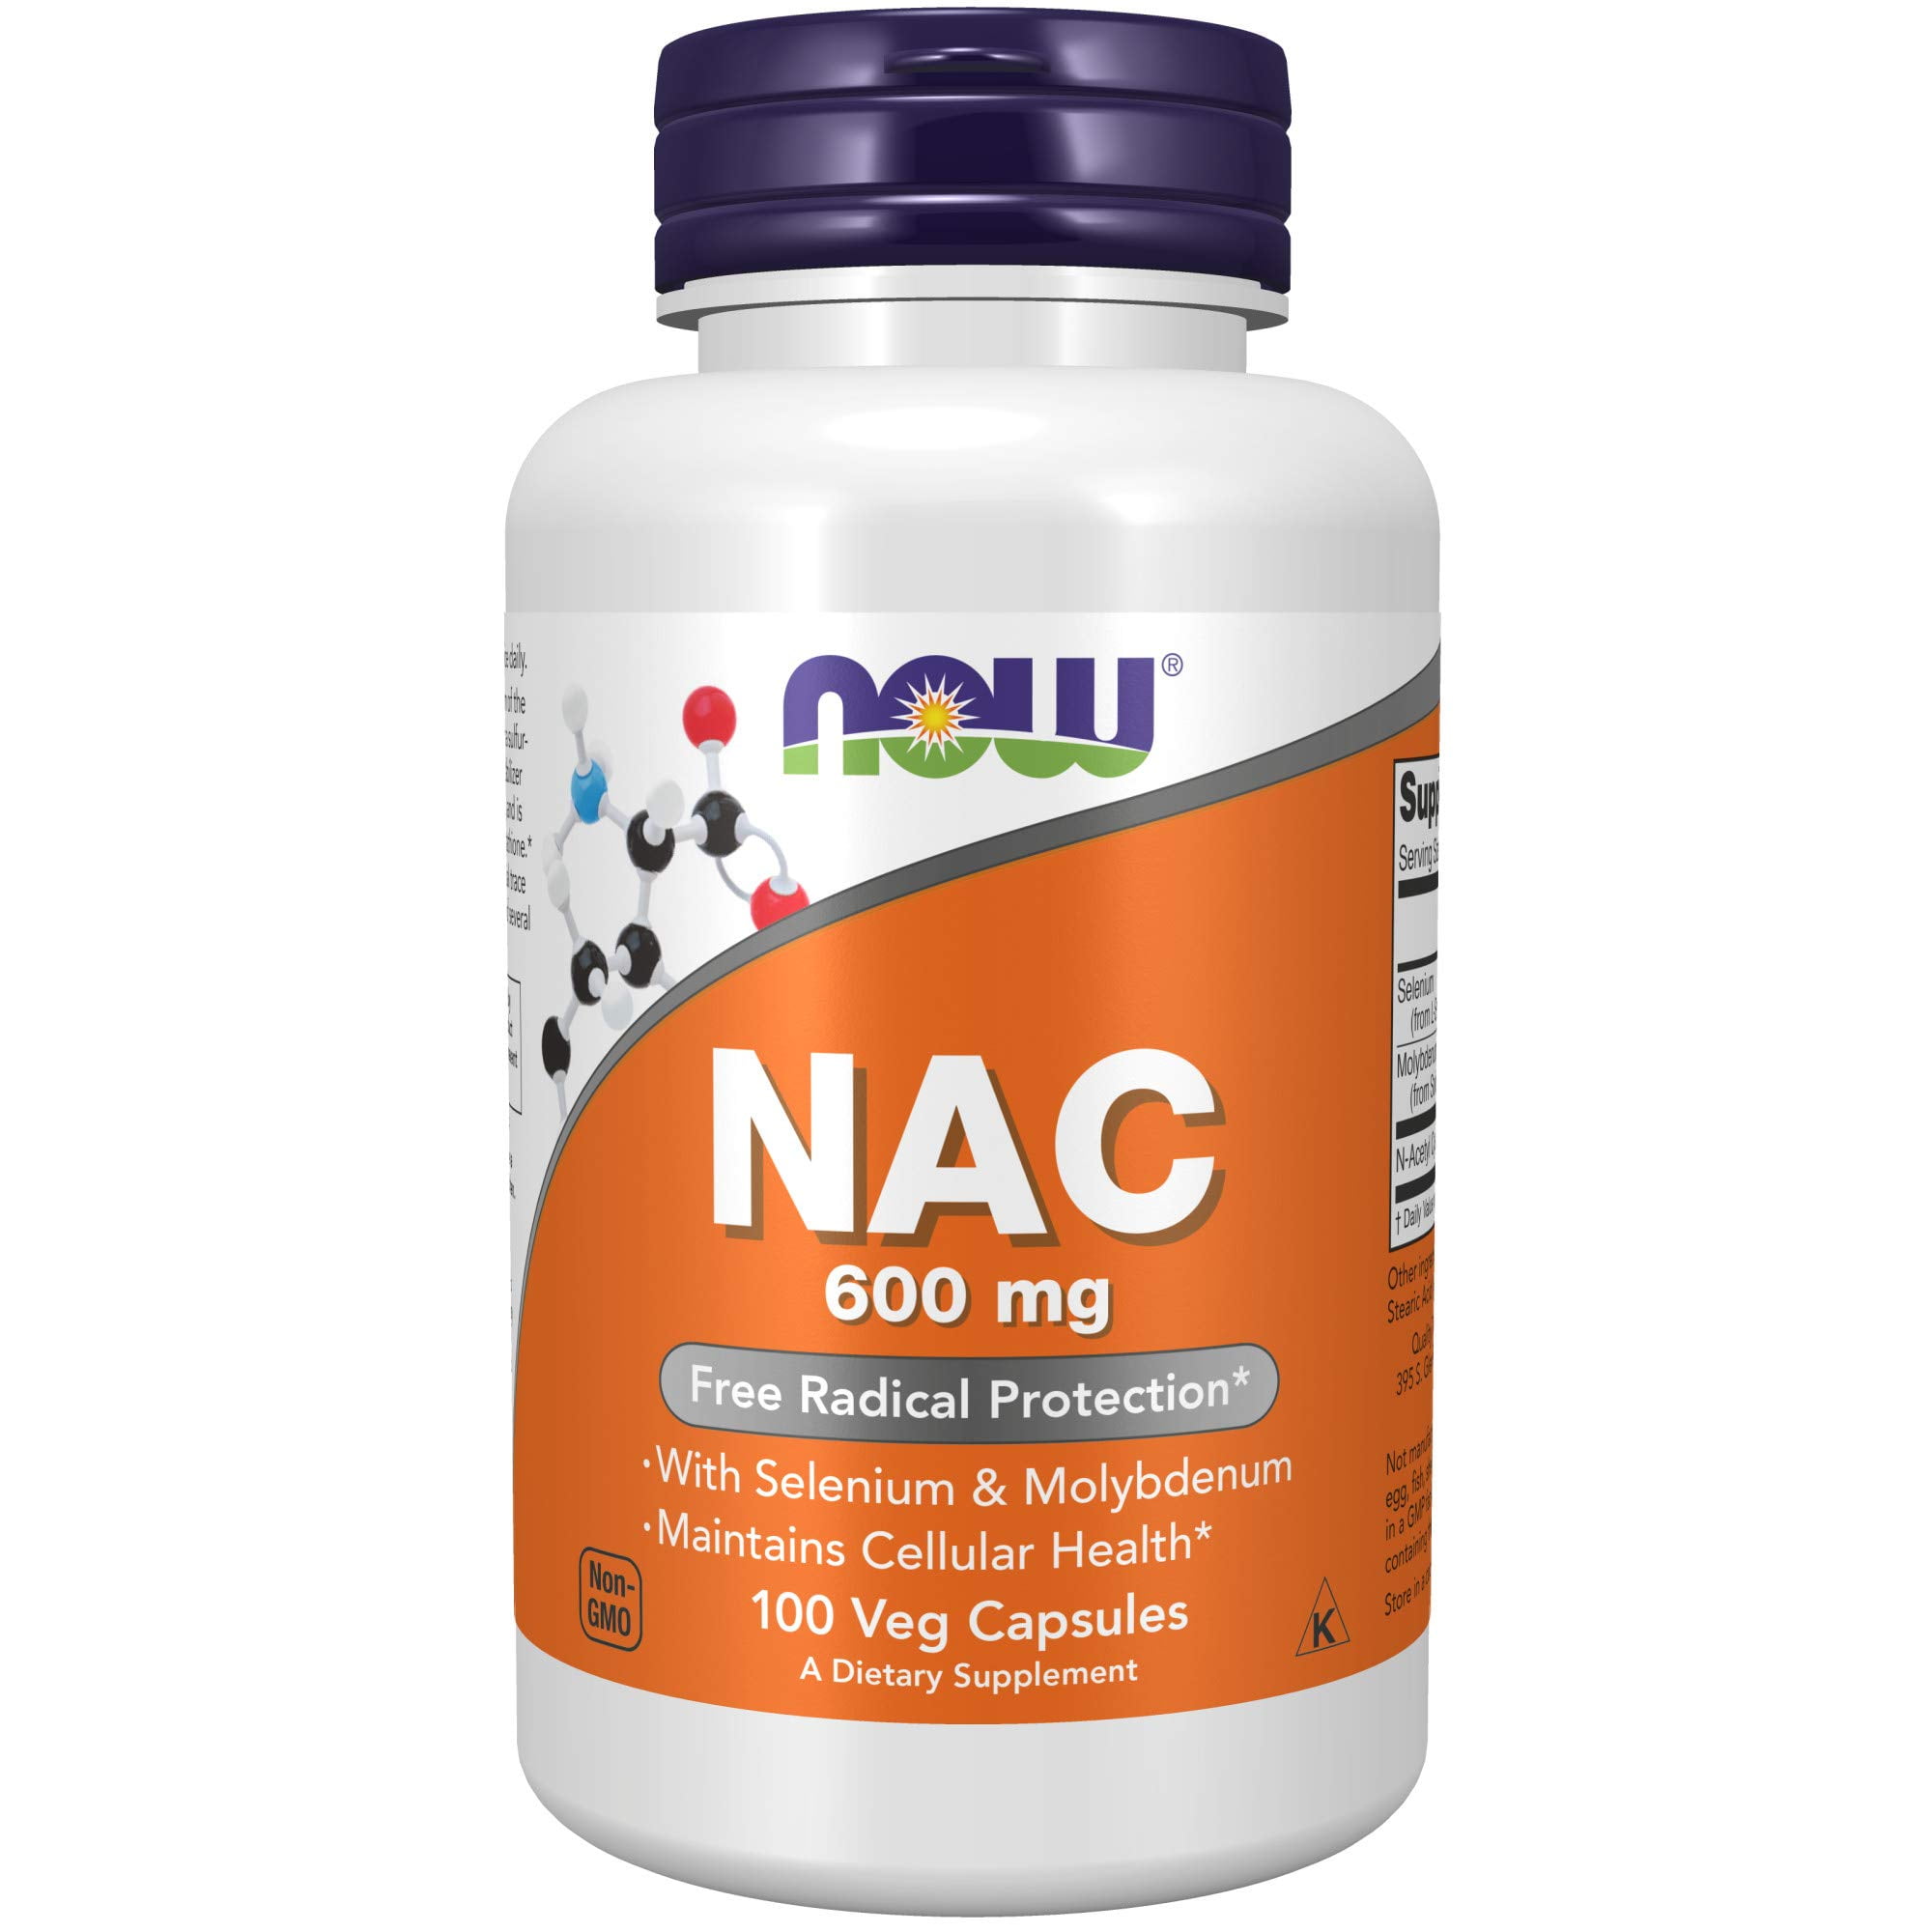 NOW Supplements, NAC (N-Acetyl Cysteine) 600 mg with Selenium & Molybdenum, 100 Veg Capsules Sale